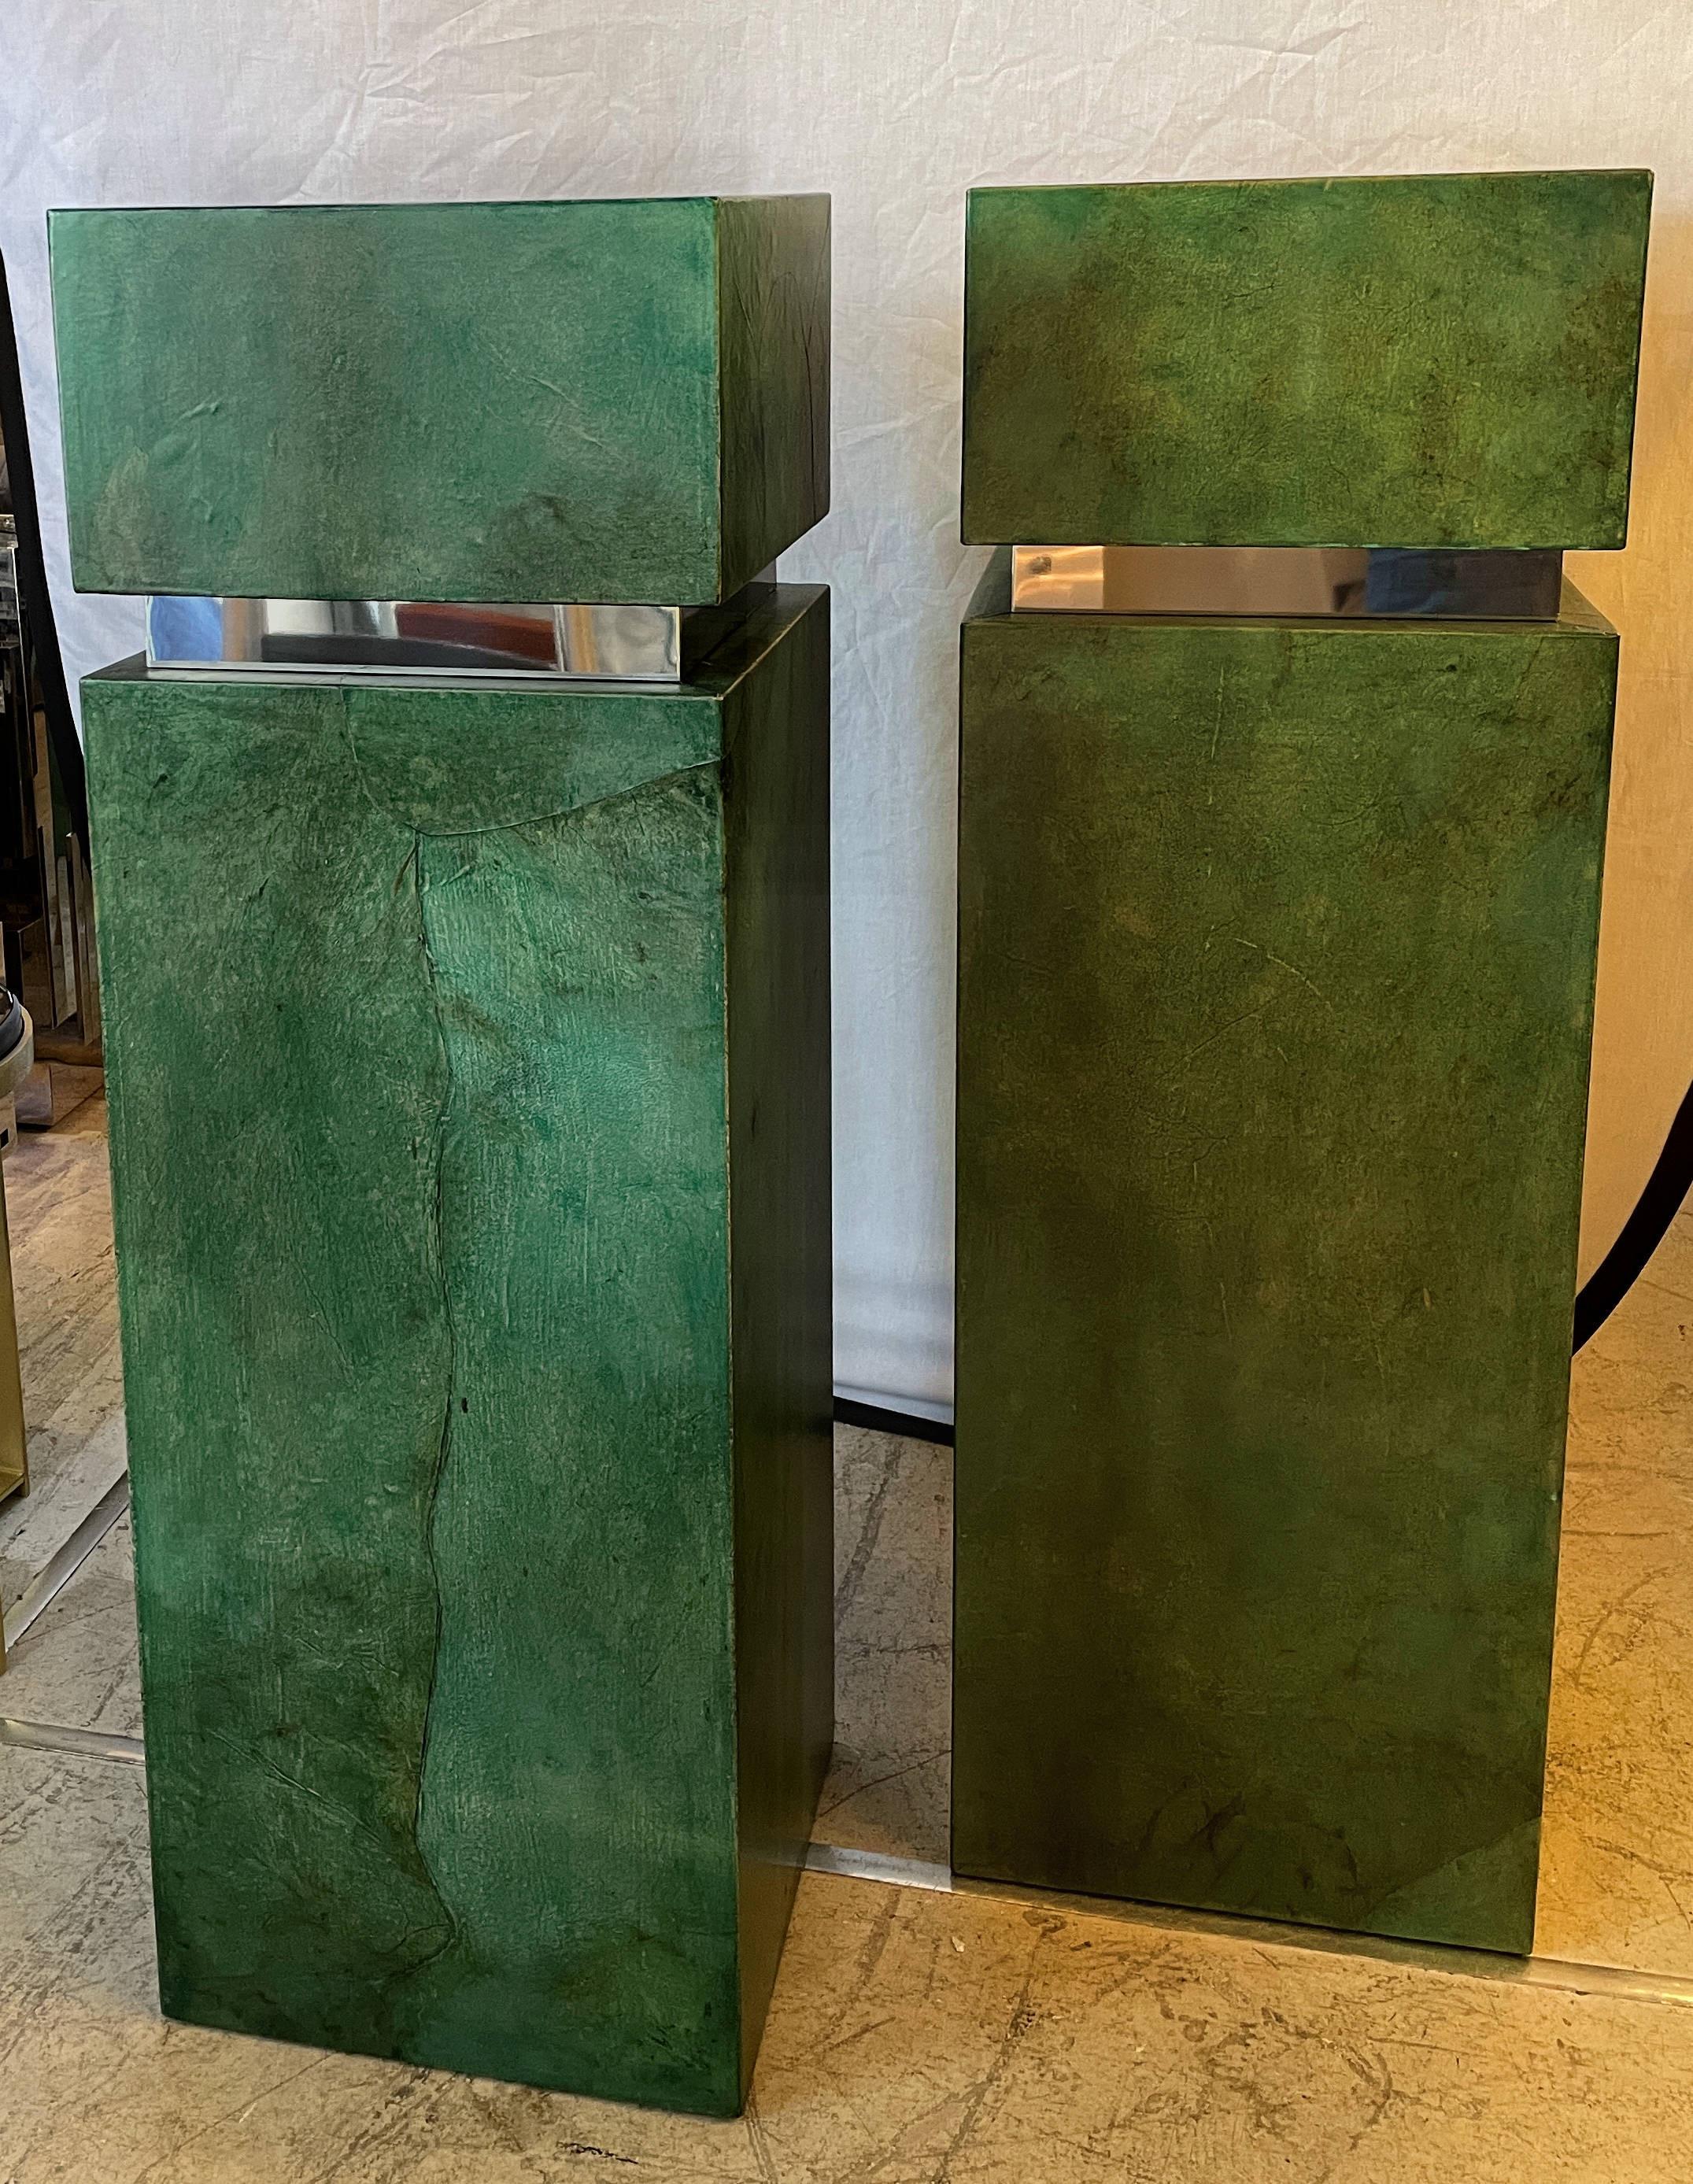 A pair of stunning pedestals with wood bases adorned in lacquered green goatskin parchment and stainless steel, in the style of Aldo Tura. The condition is wonderful and the color is vivid.